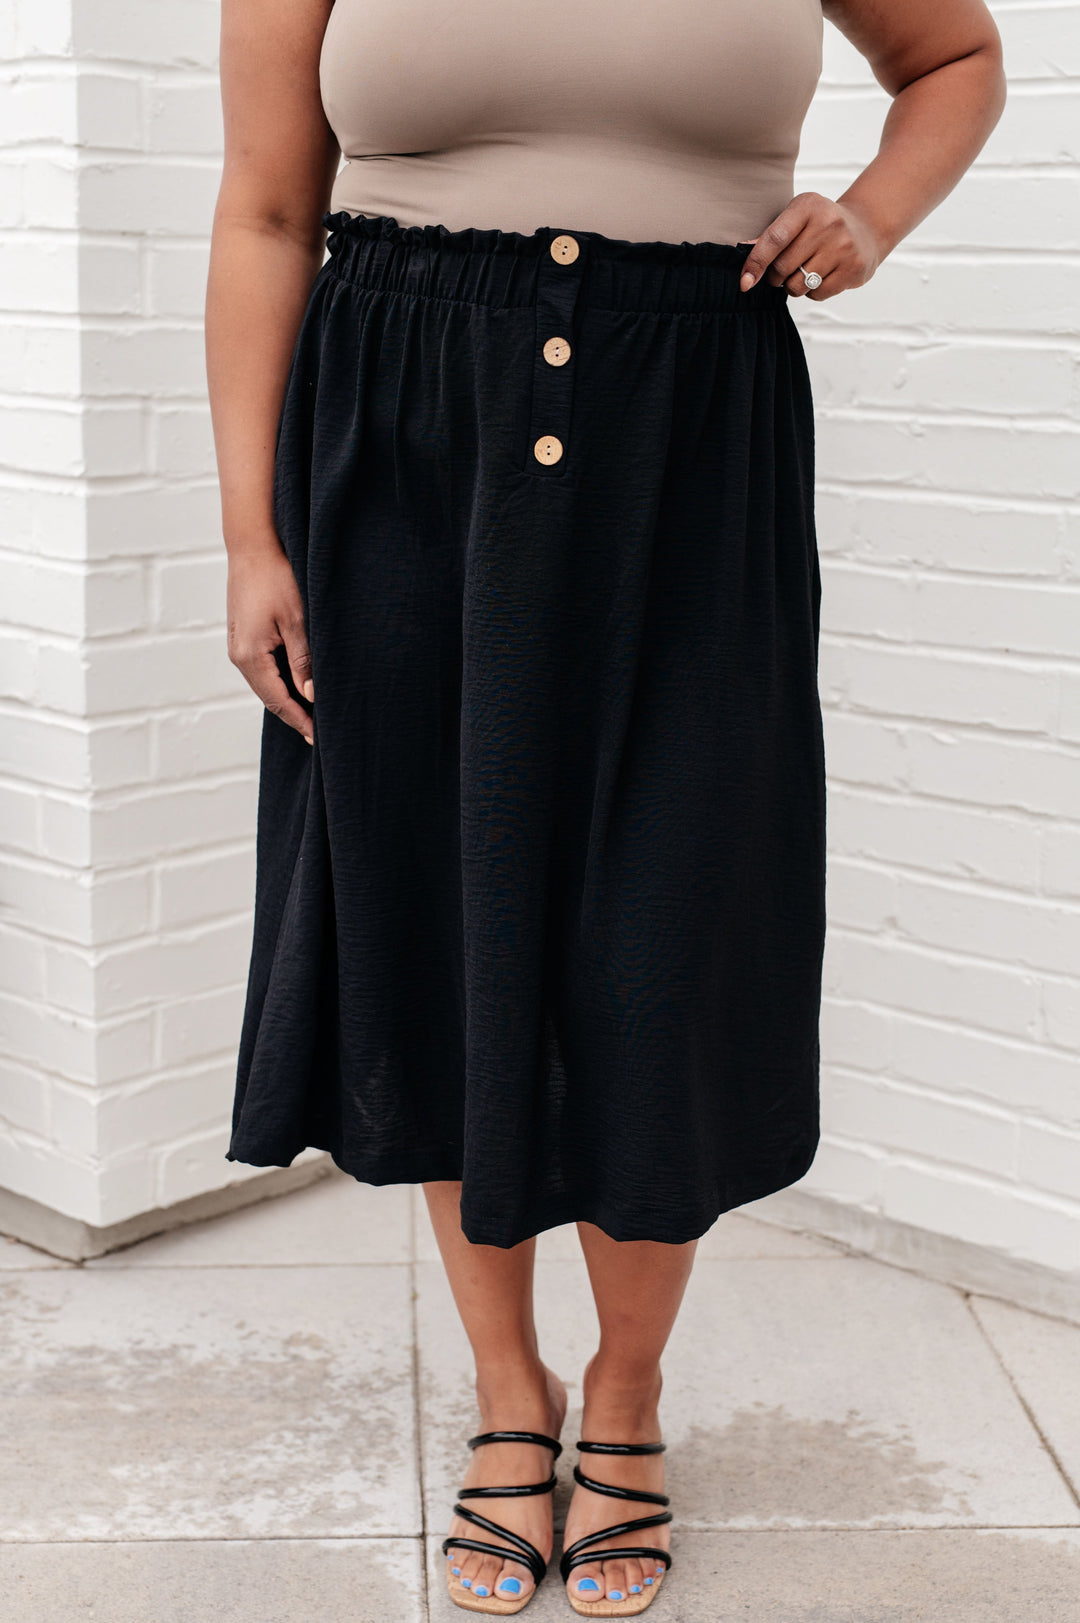 She's a Scholar Mid-Length Skirt-Bottoms-Inspired by Justeen-Women's Clothing Boutique in Chicago, Illinois